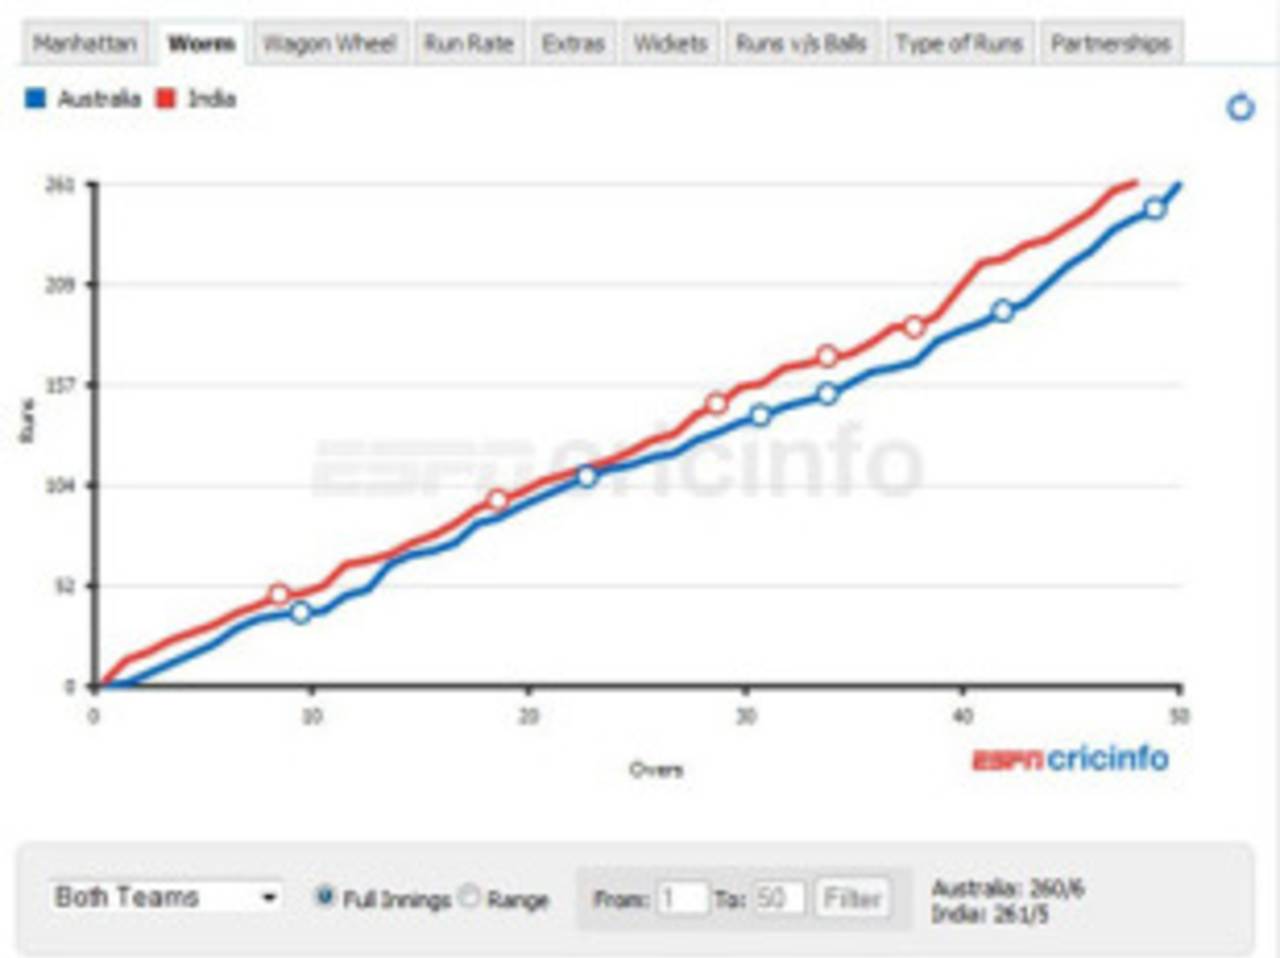 Worm of the Australian  and Indian innings in the second quarter-final